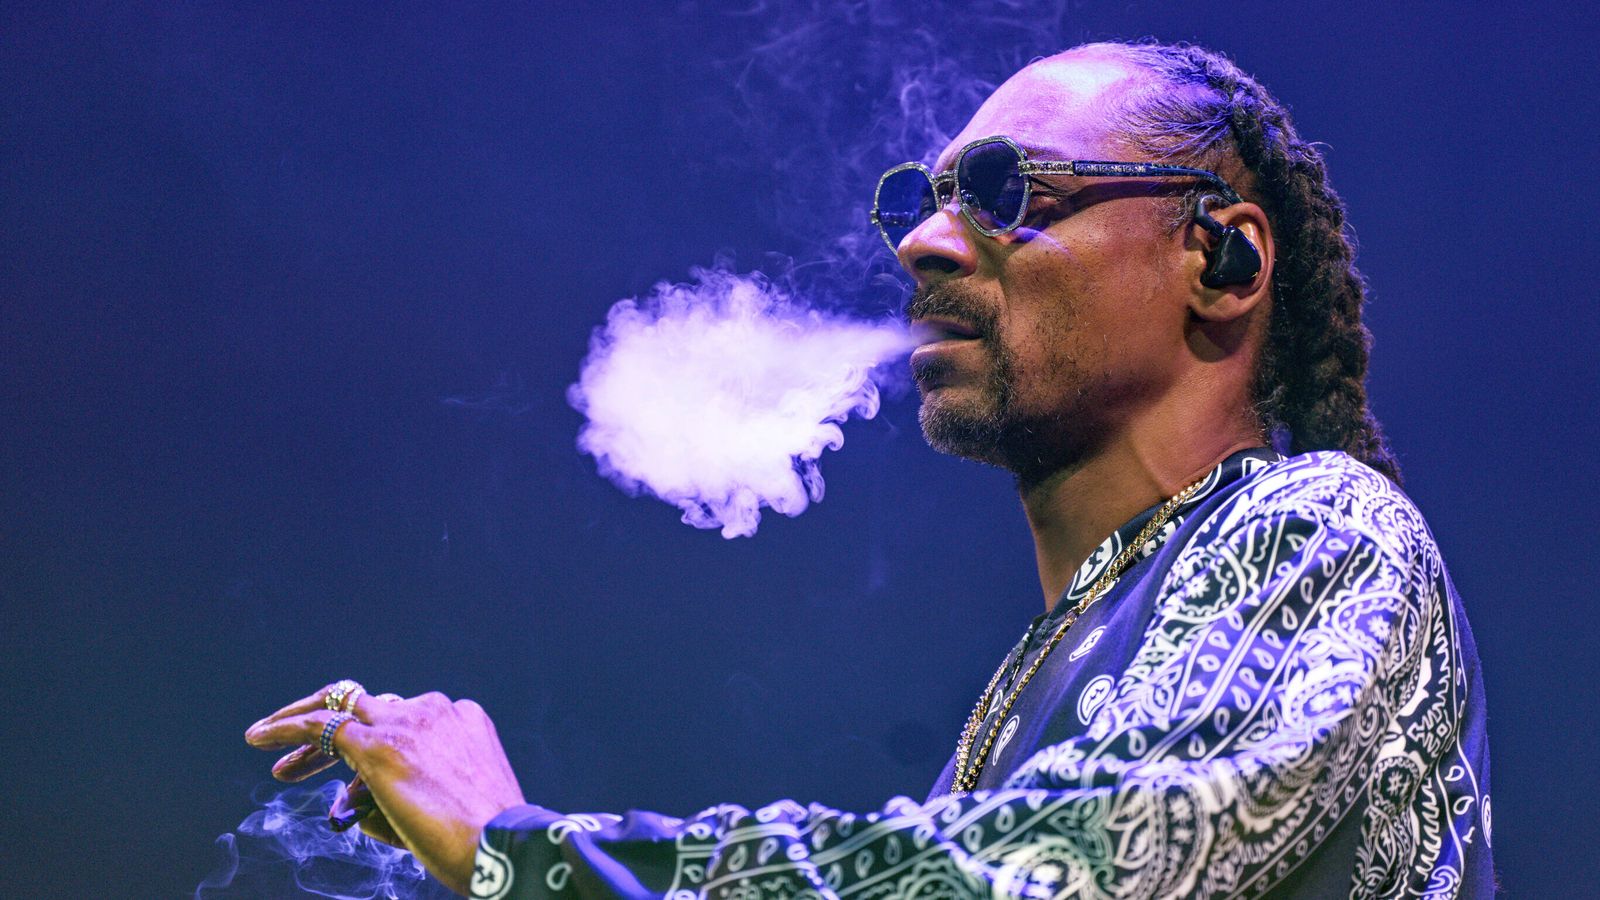 Snoop Dogg Quits Smoking “Smoke”: AD Shows Support And Vows To Protect Dogg’s Decision